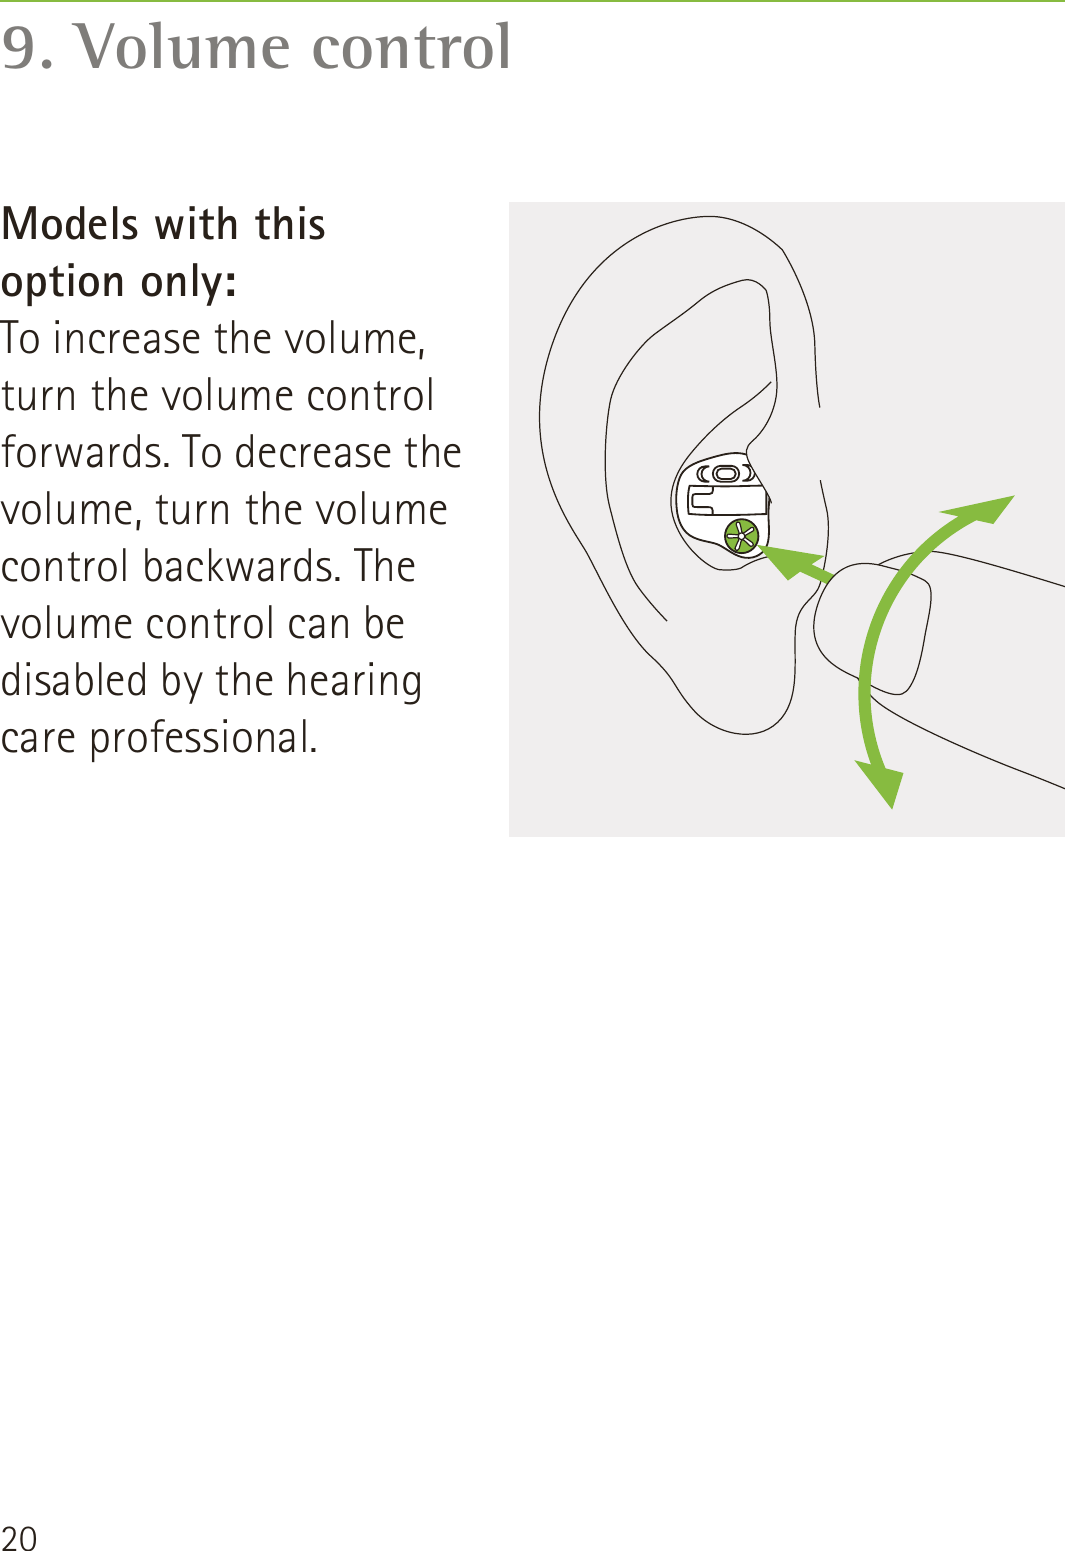 209. Volume controlModels with this  option only: To increase the volume, turn the volume control forwards. To decrease the volume, turn the volume control backwards. The volume control can be disabled by the hearing care professional.